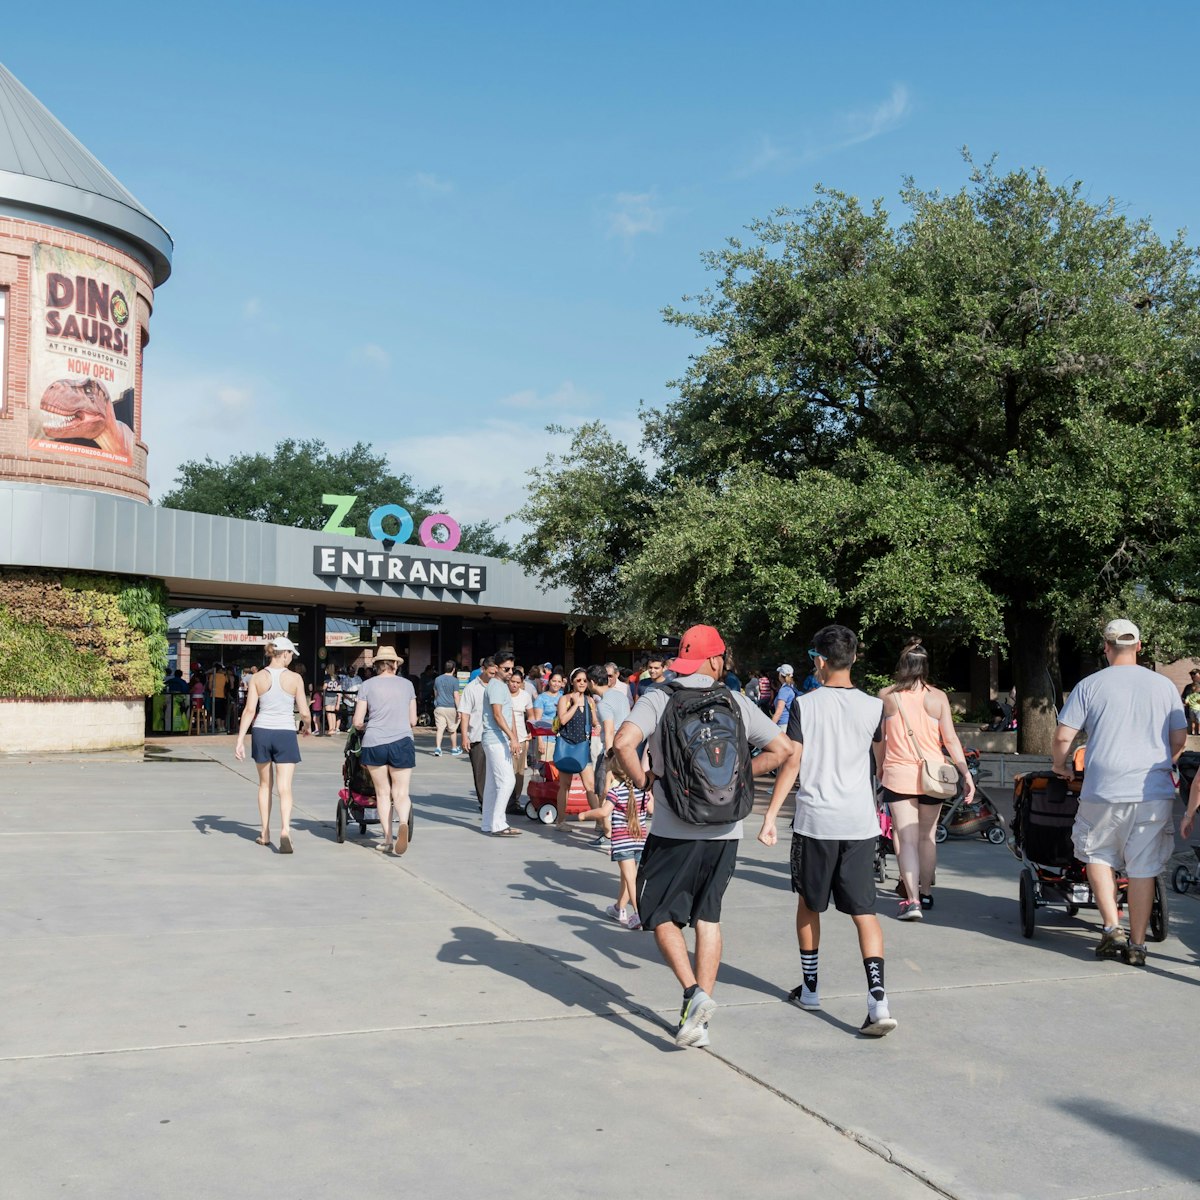 HOUSTON, US-JUN 25, 2016: Visitors entering the Houston Zoo, a 55-acre zoological park located in Hermann Park, Houston, Texas. It houses over 6,000 animals, and receives 1.8 million visitors per year